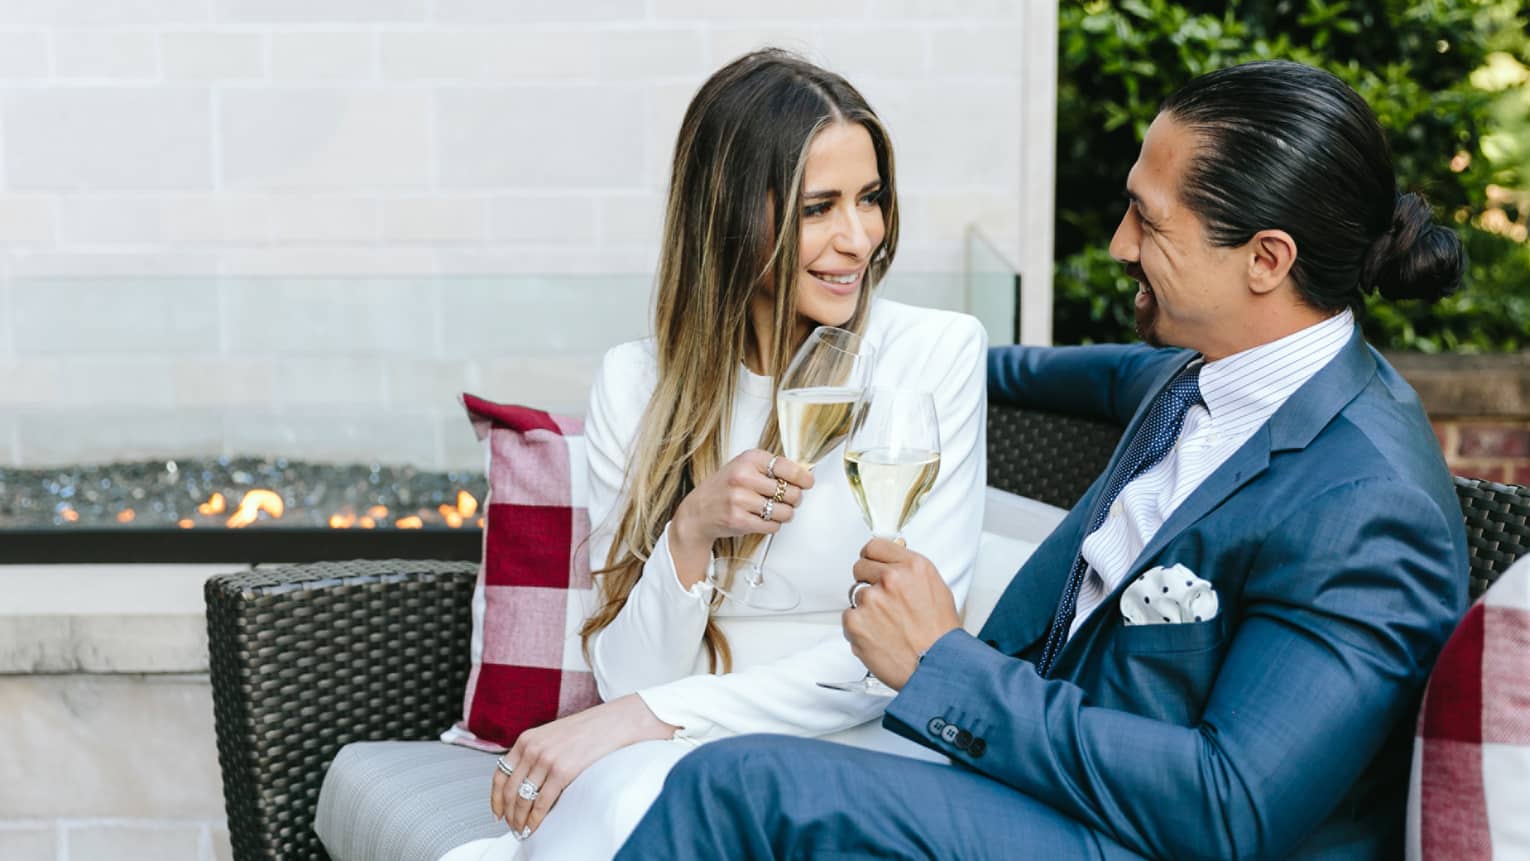 A woman in a white suit and a man in a gray suit look at each other smiling as they sip white wine on an outdoor couch during daylight.